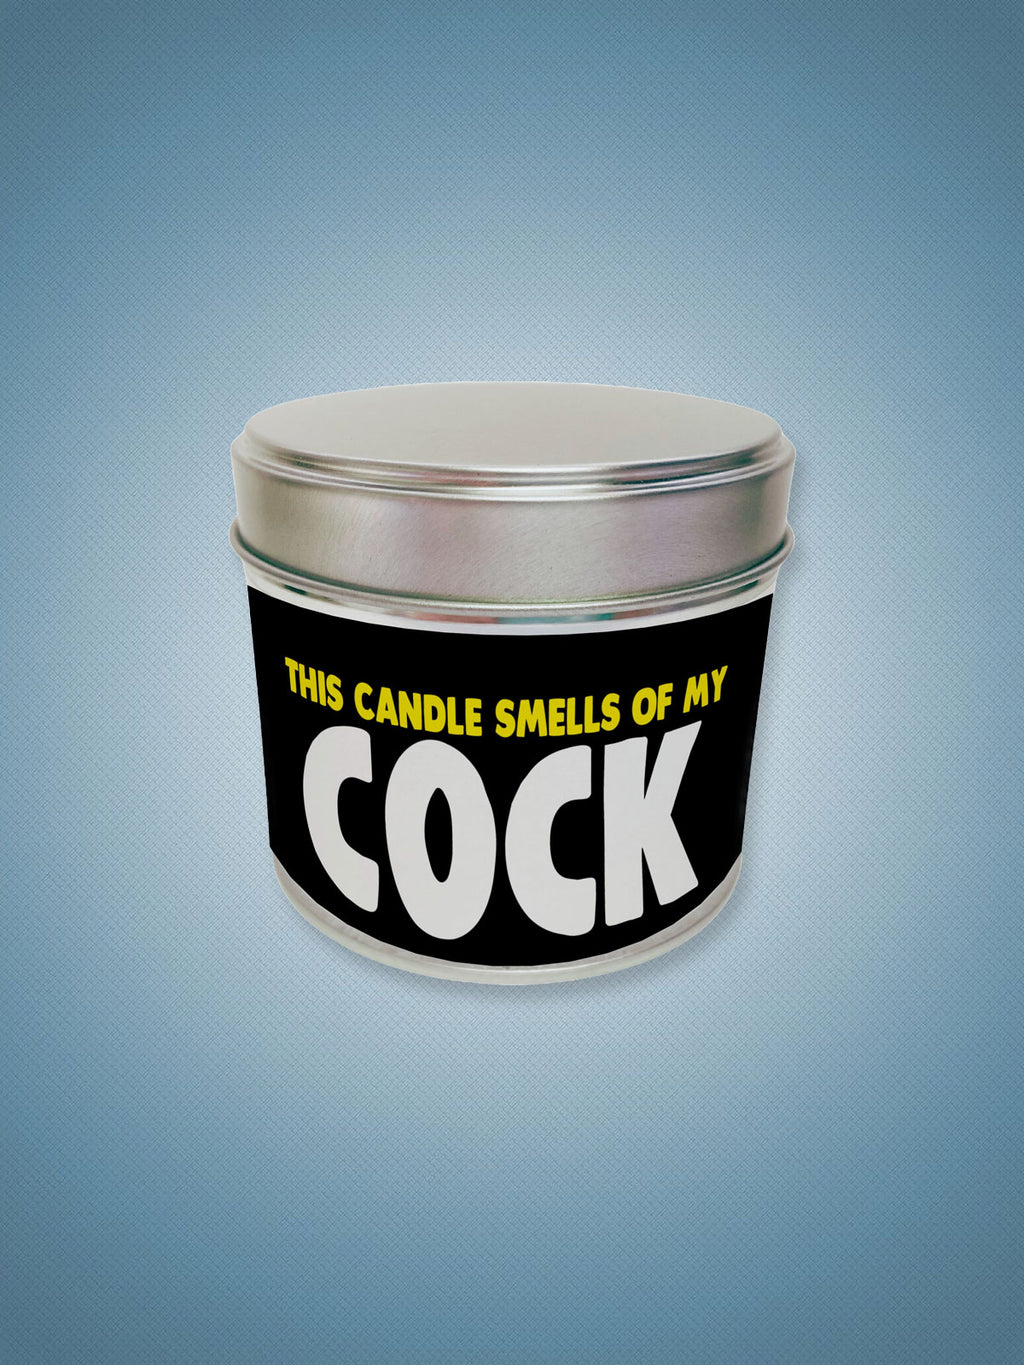 This Candle Smells Of My Cock - tin candle